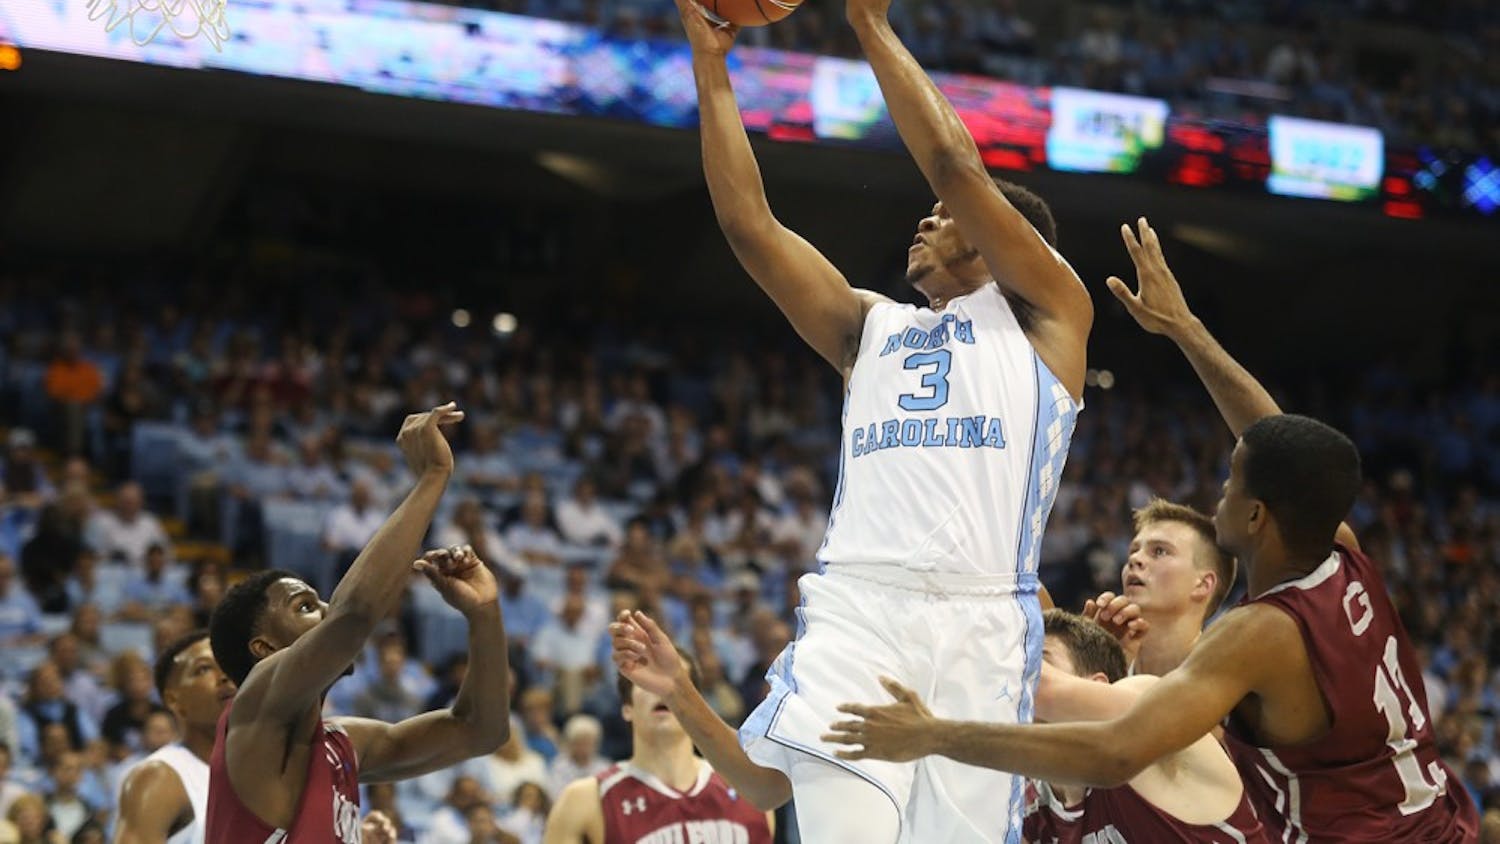 Junior forward Kennedy Meeks (3) goes up for a shot. Meeks scored 14 points. 